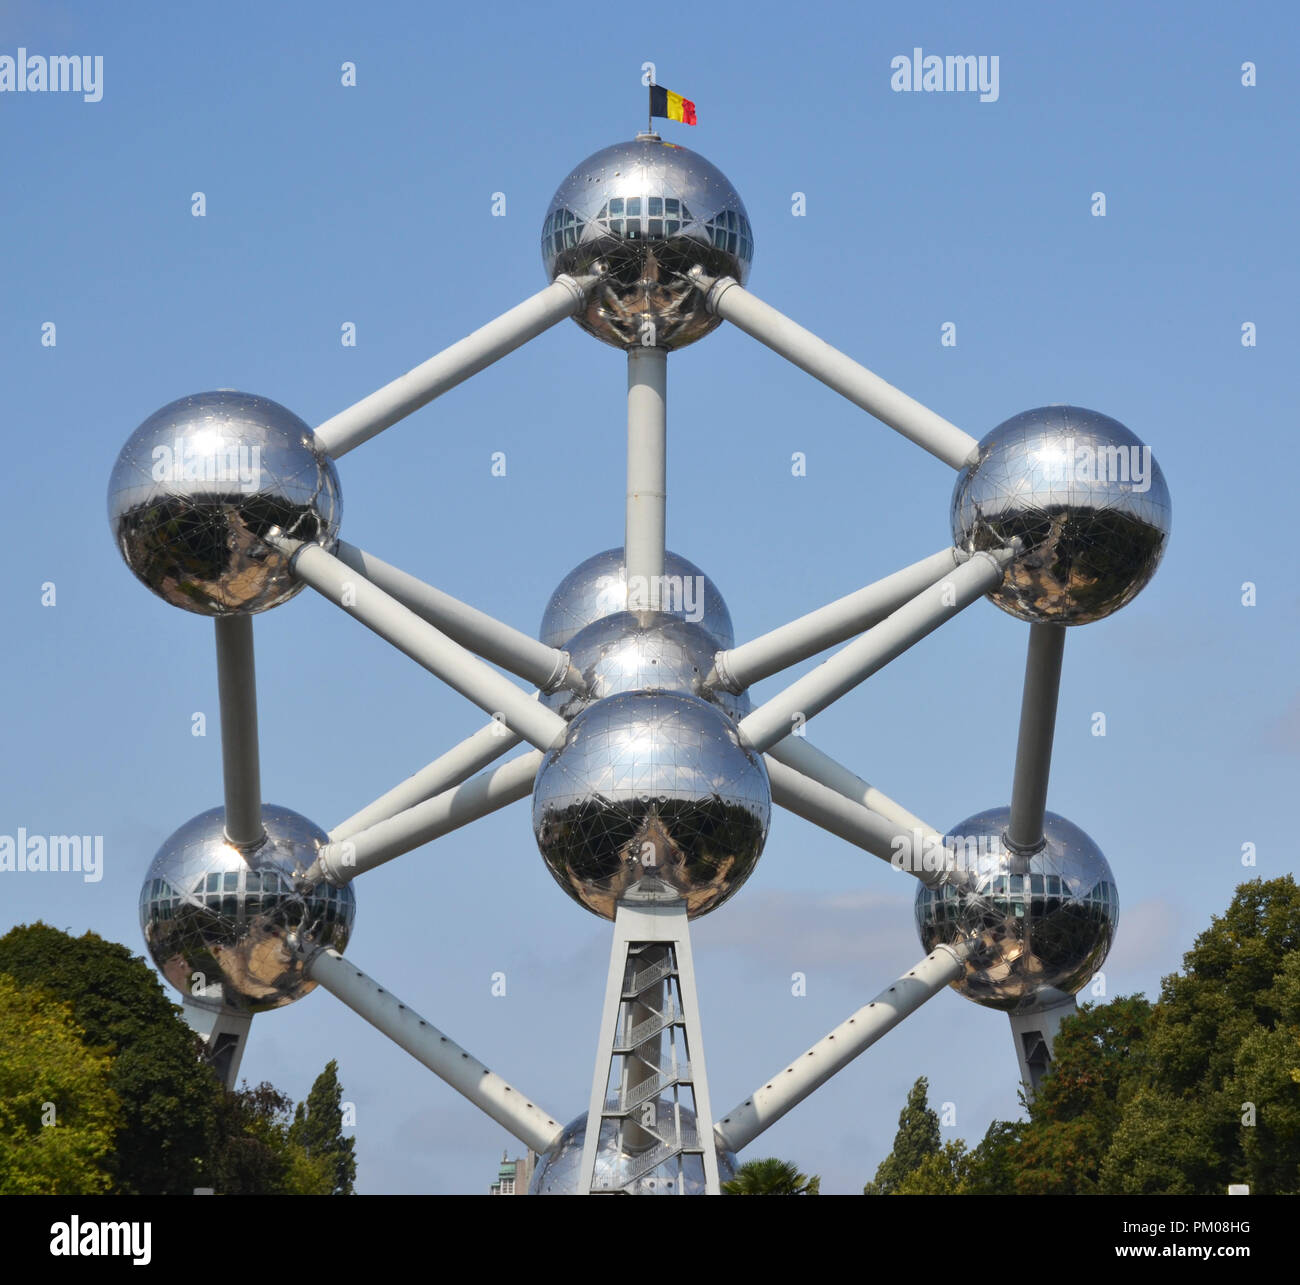 Brussels, Belgium - August 19, 2018: Atomium building constructed for Expo 58, the 1958 Brussels World's Fair, in Brussels, Belgium. Stock Photo